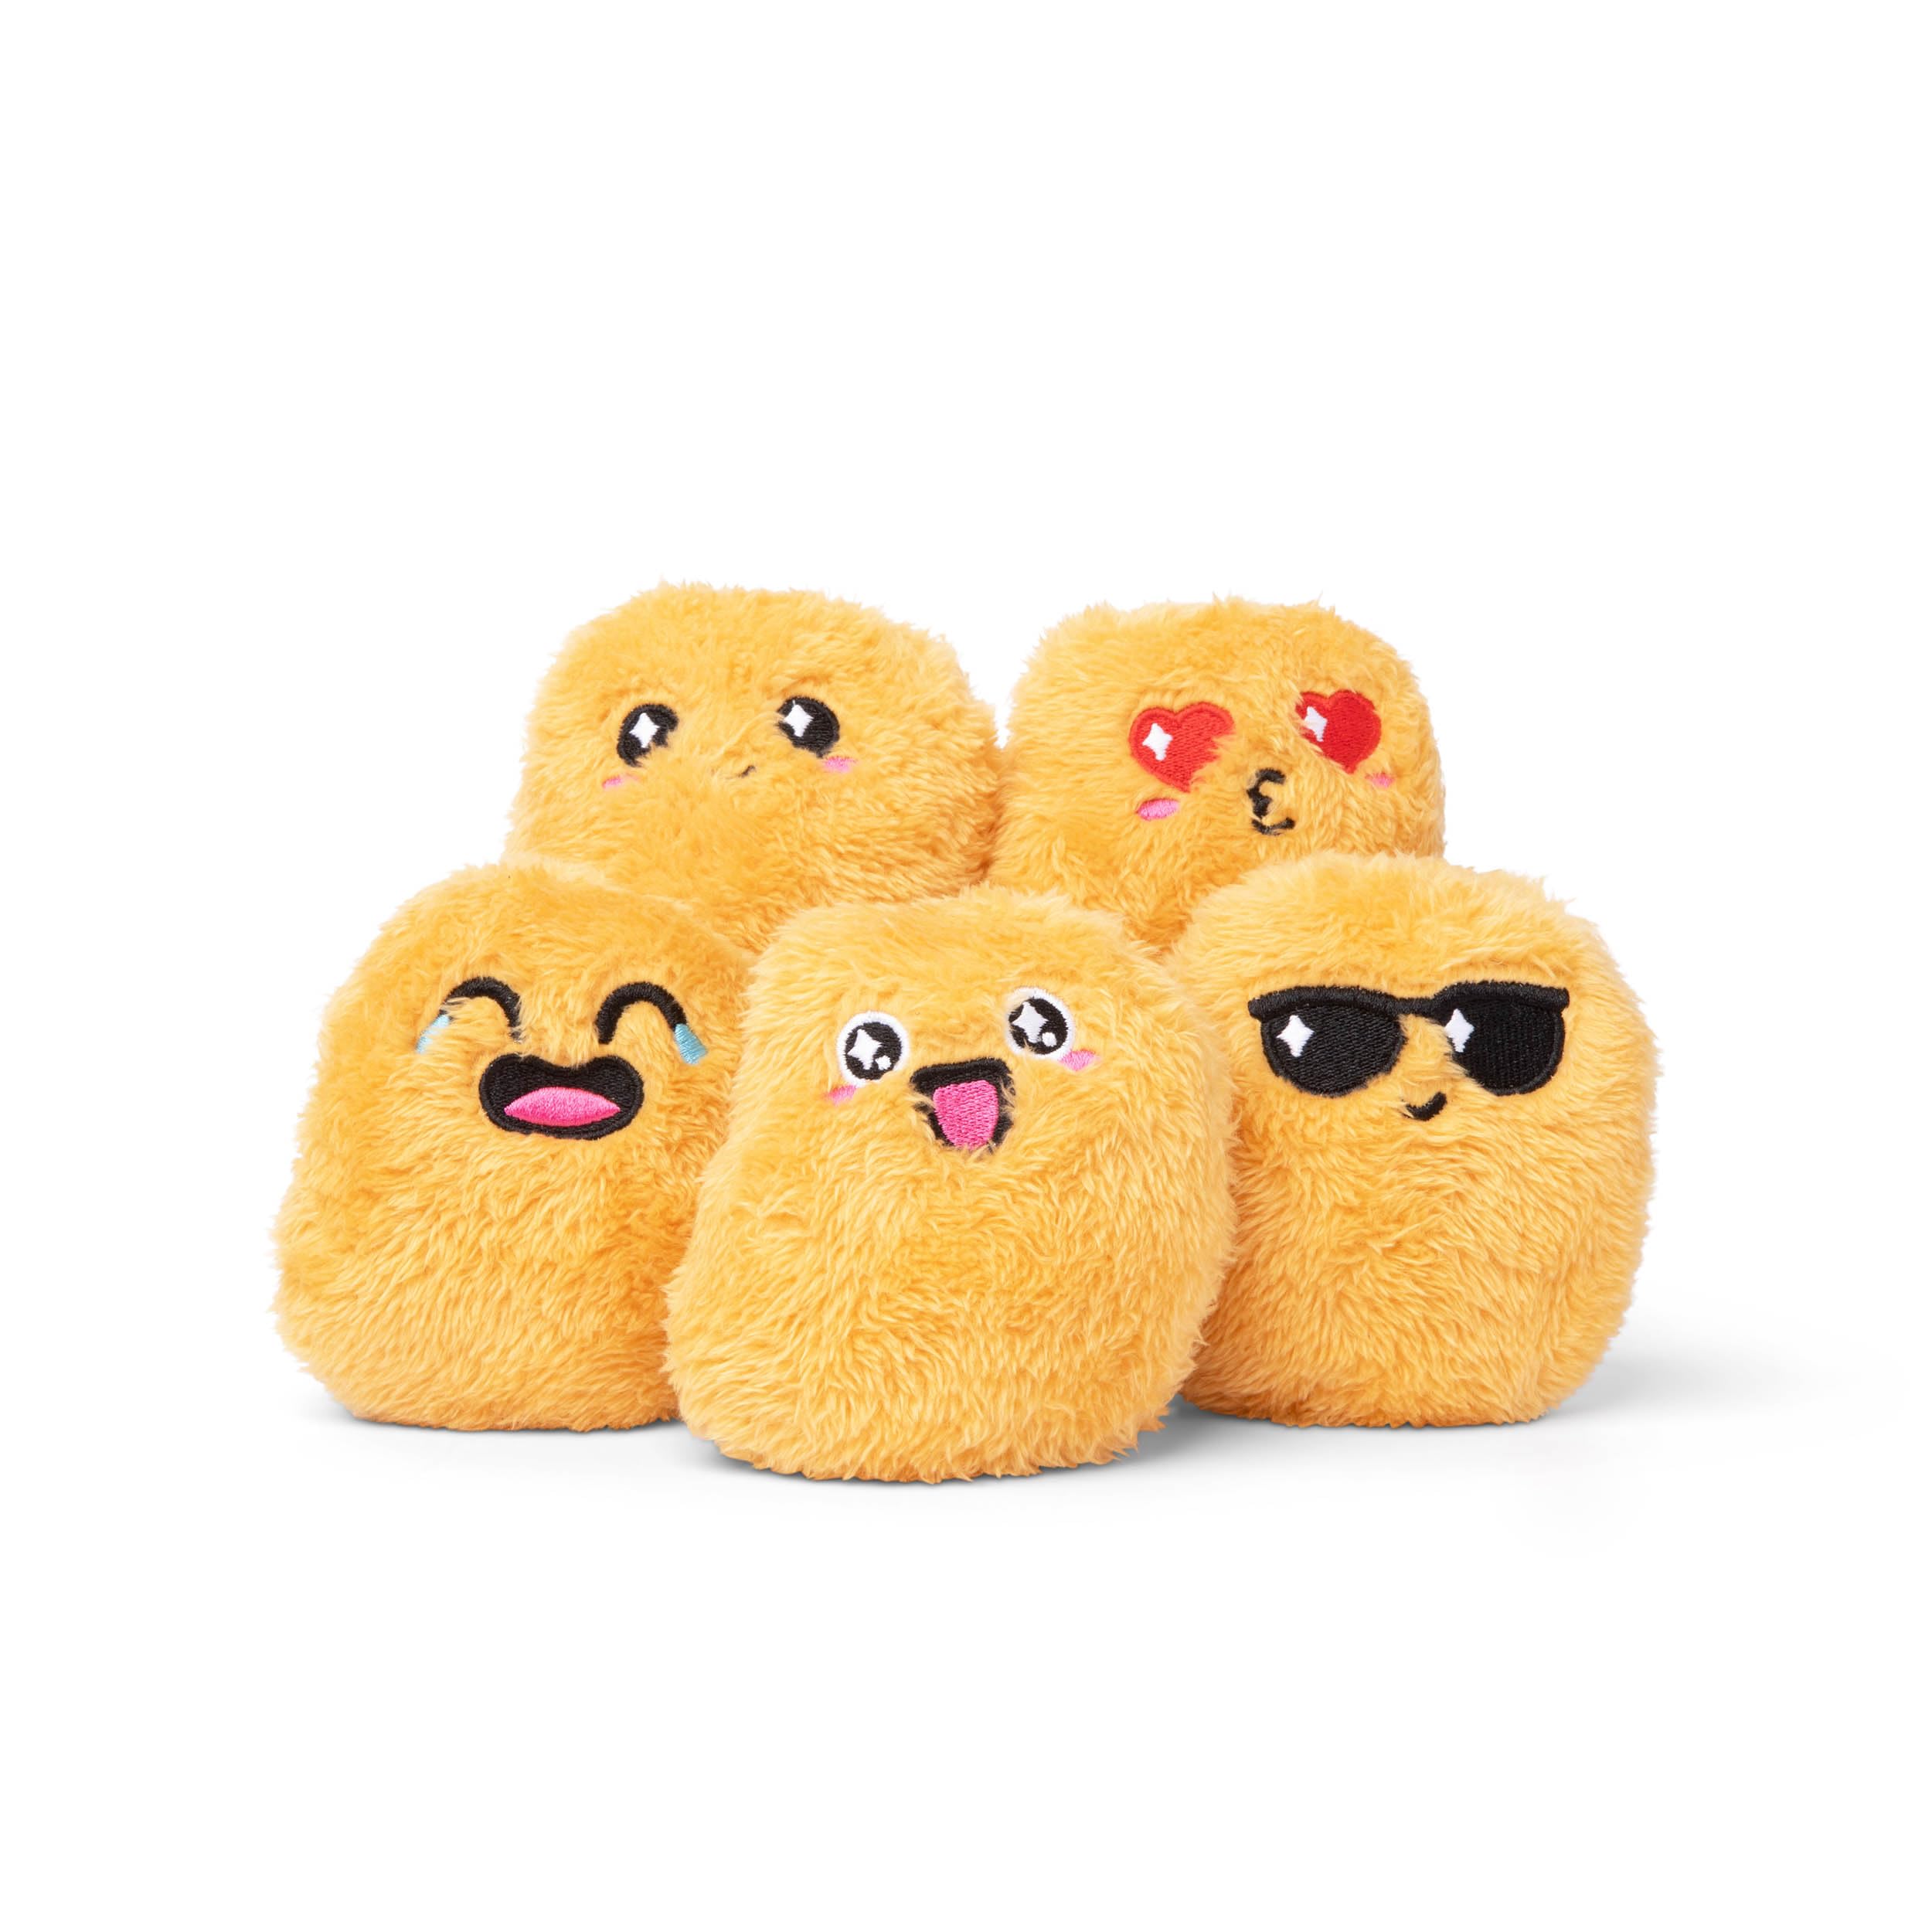 WHAT DO YOU MEME? Emotional Support Nuggets - Plush Nuggets Stuffed Animal by Emotional Support Plushies Medium